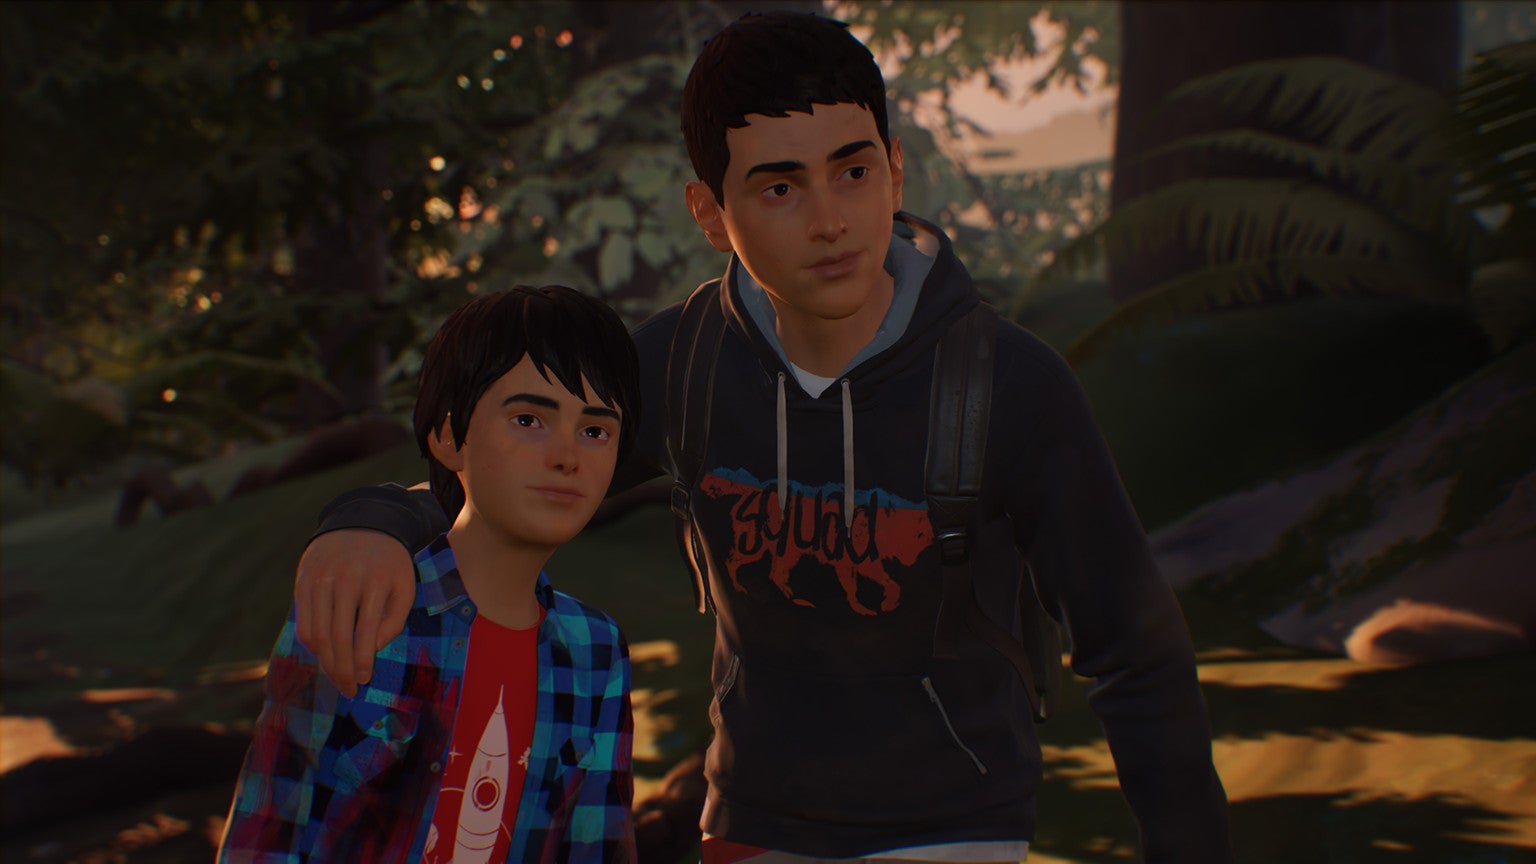 The protagonists of Life Is Strange 2 in a close-up against a forest background. Older brother Sean has his arm around younger brother Daniel, and both are smiling slightly.